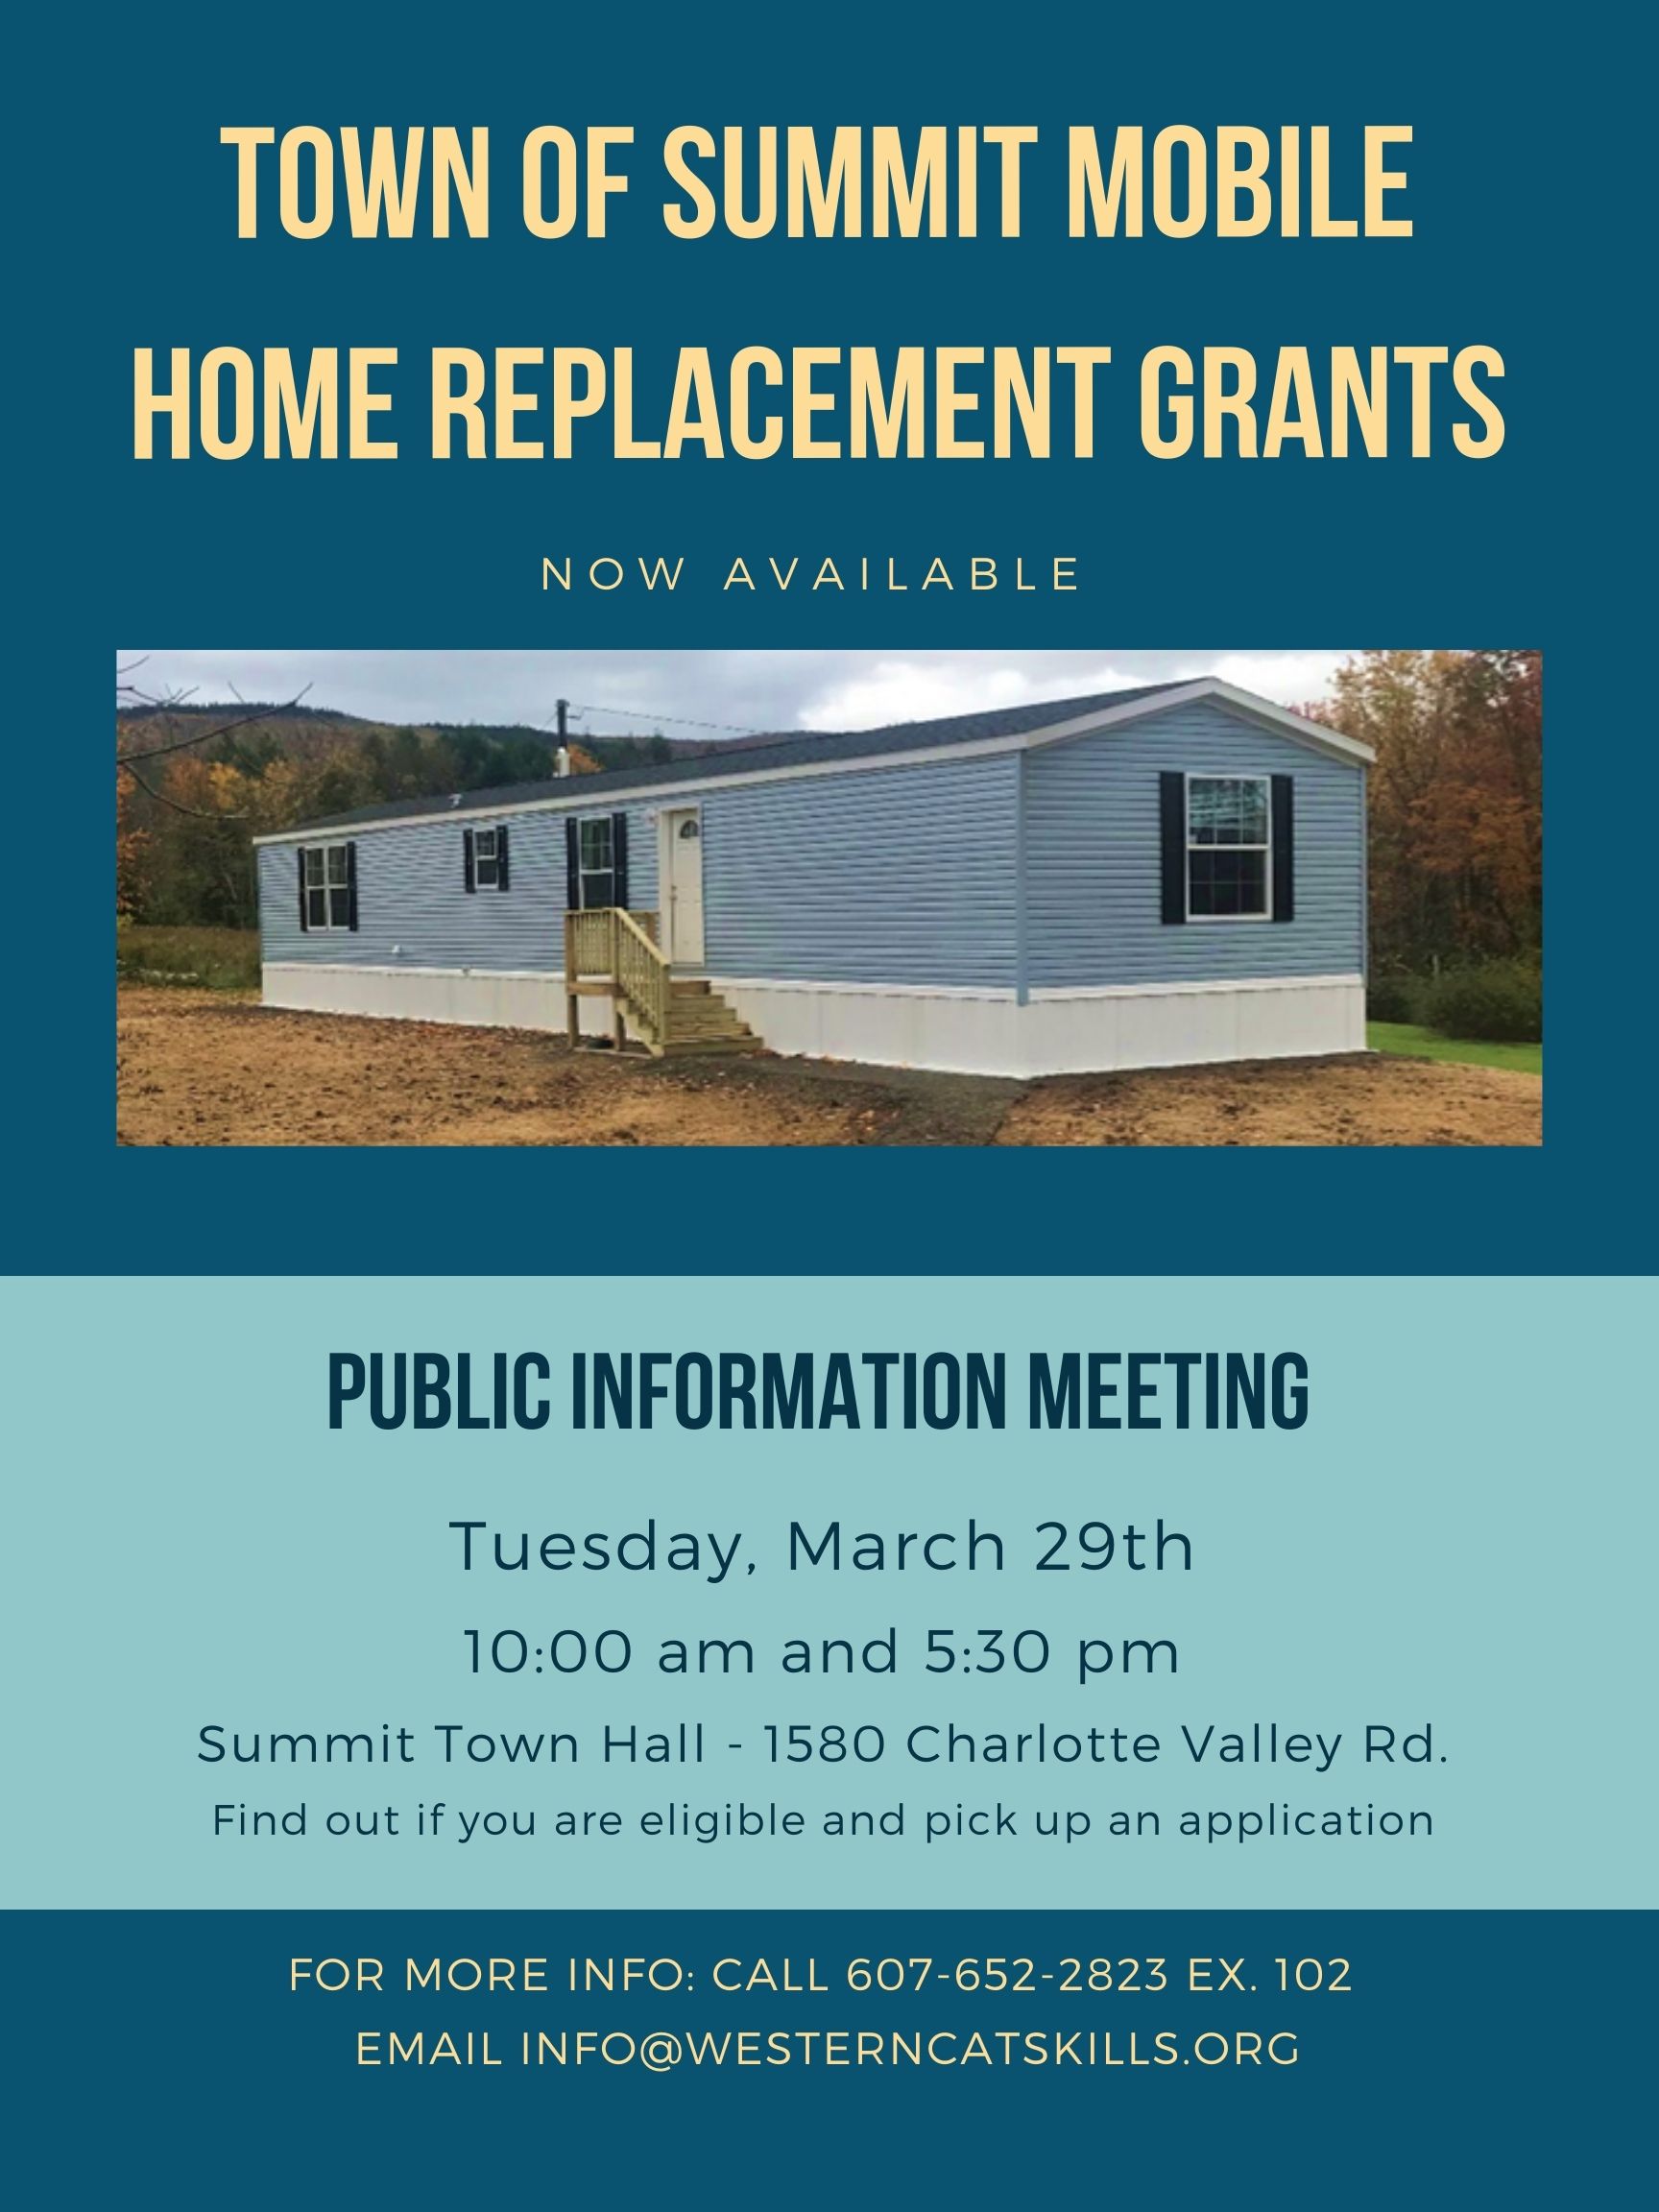 Town of Summit Mobile Home Replacement Grant